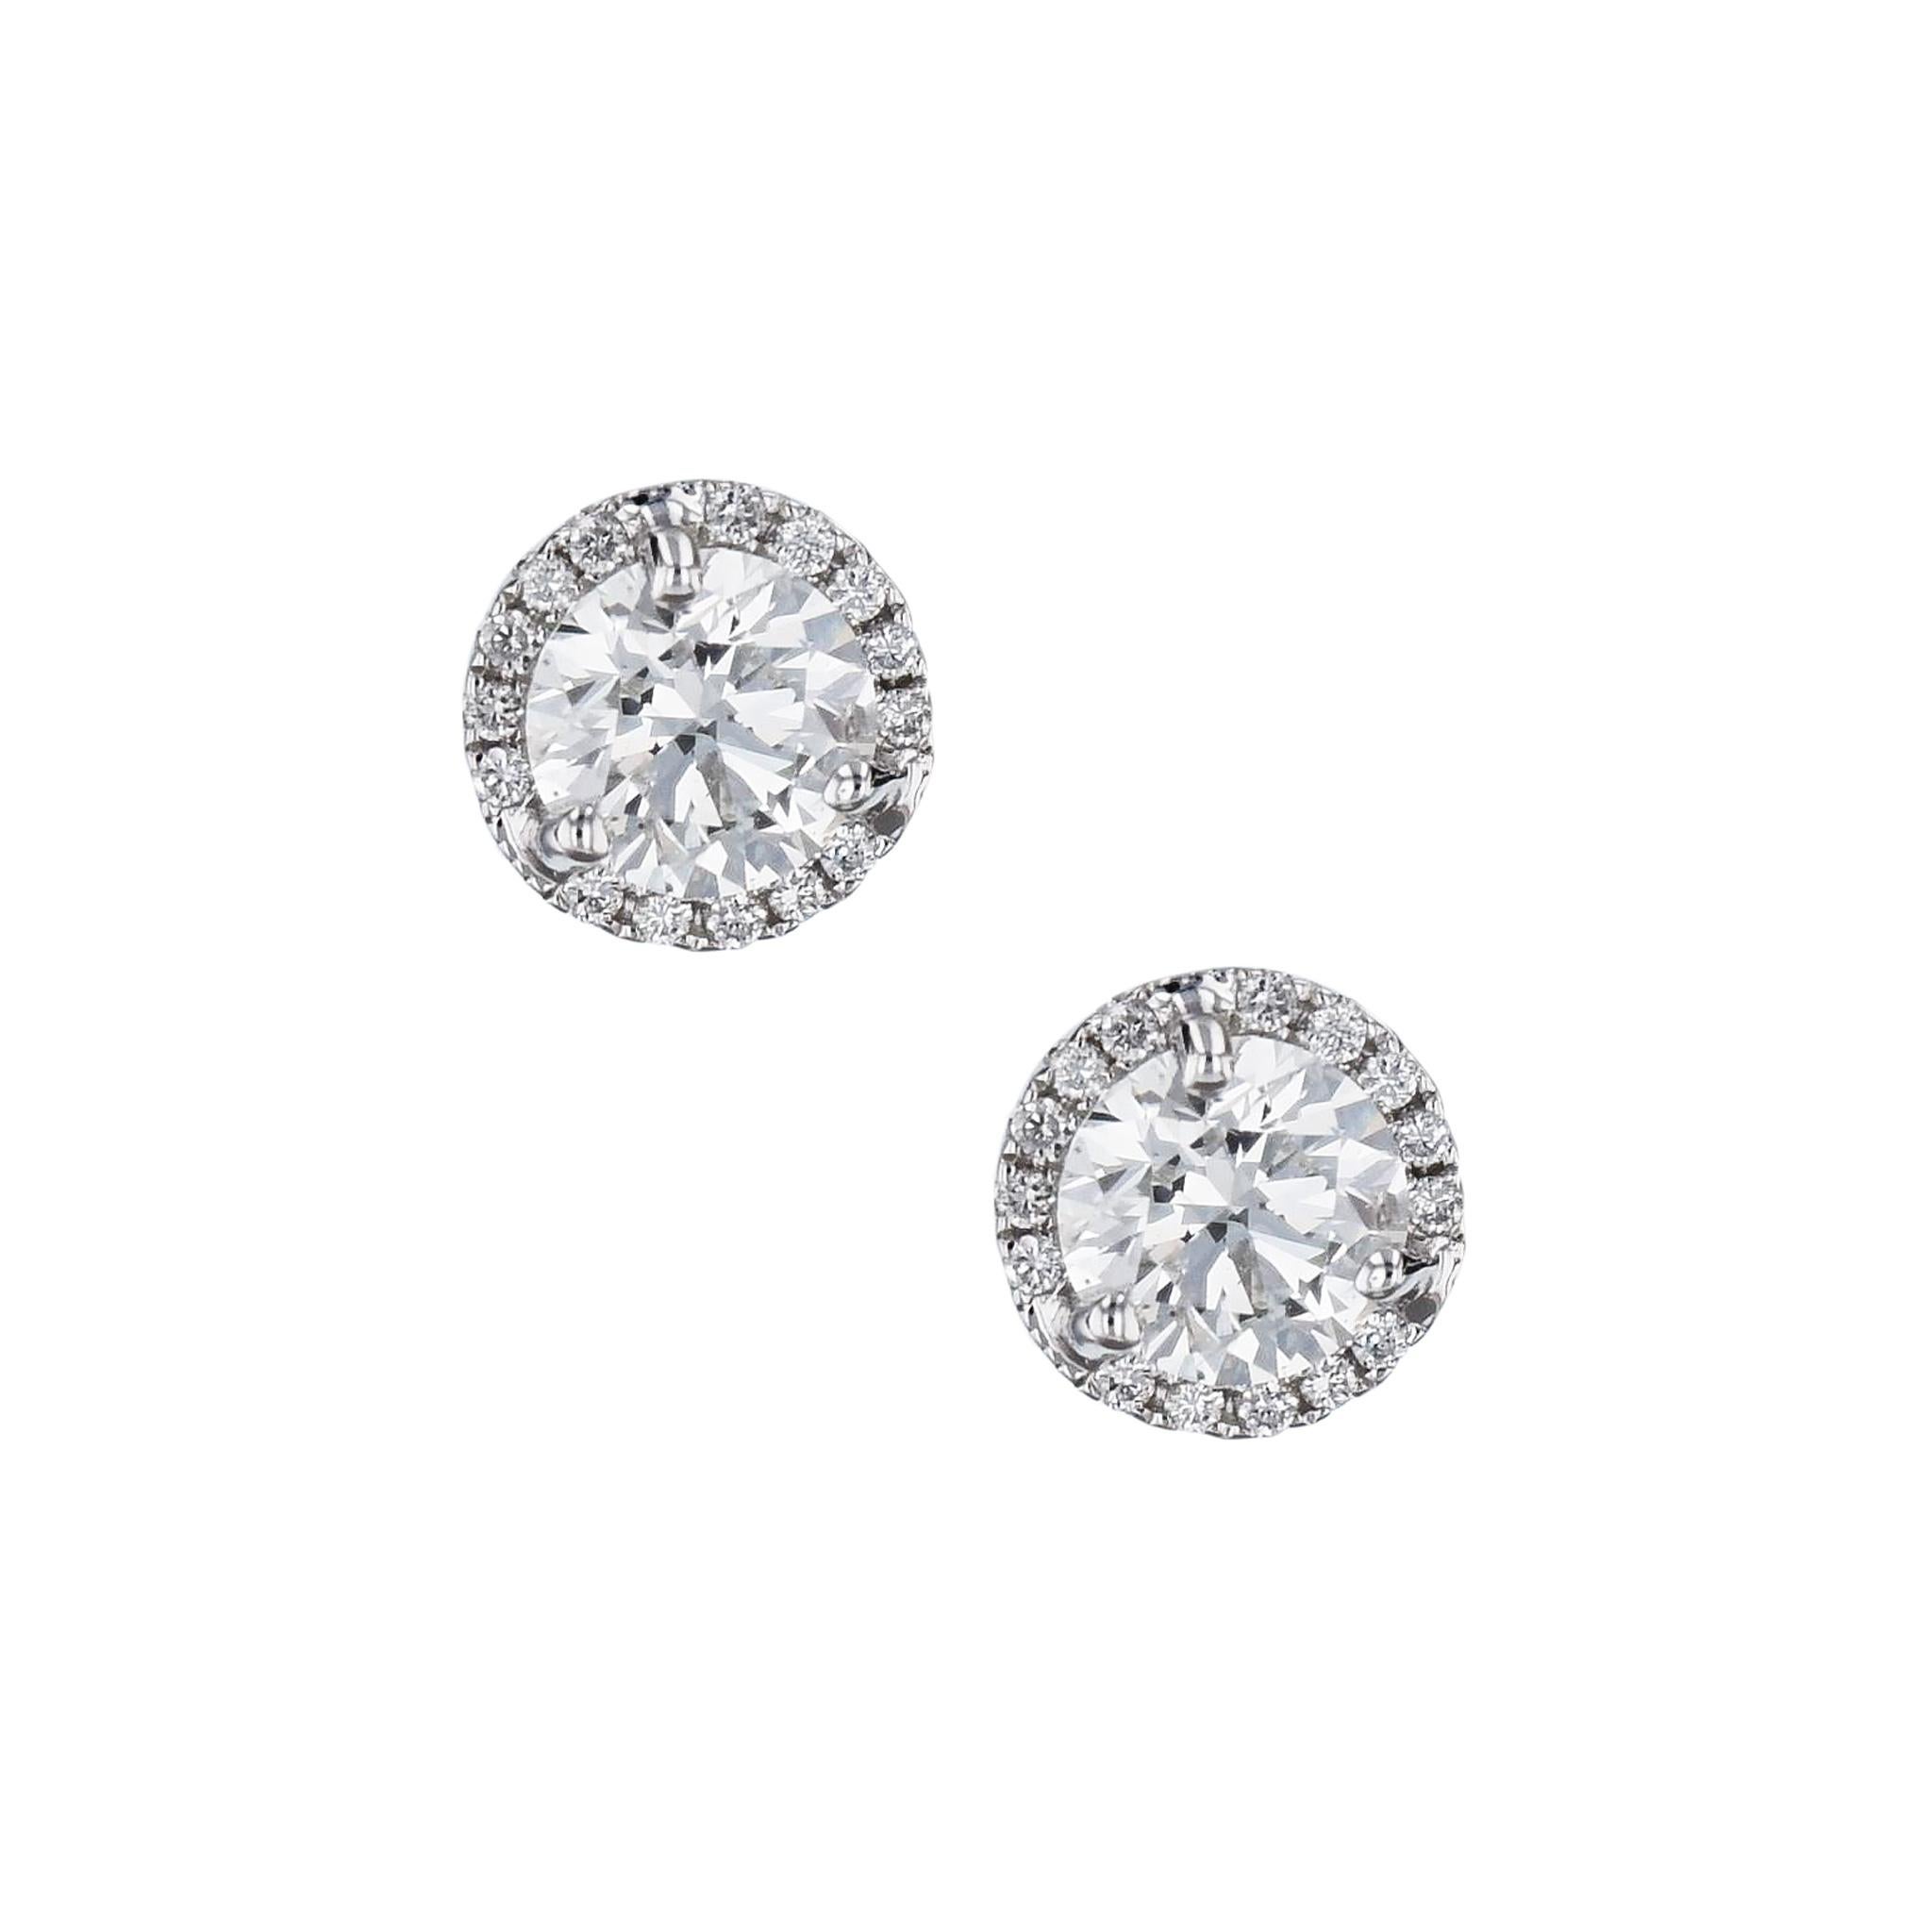 Discover a dazzling pair of Round Diamond and Pave Stud Earrings set in 18K White Gold. Featuring Round Brilliant Cut Diamonds paired with a stunning Pave Diamond Halo. Handcrafted with love by the H&H Collection, these earrings are sure to be